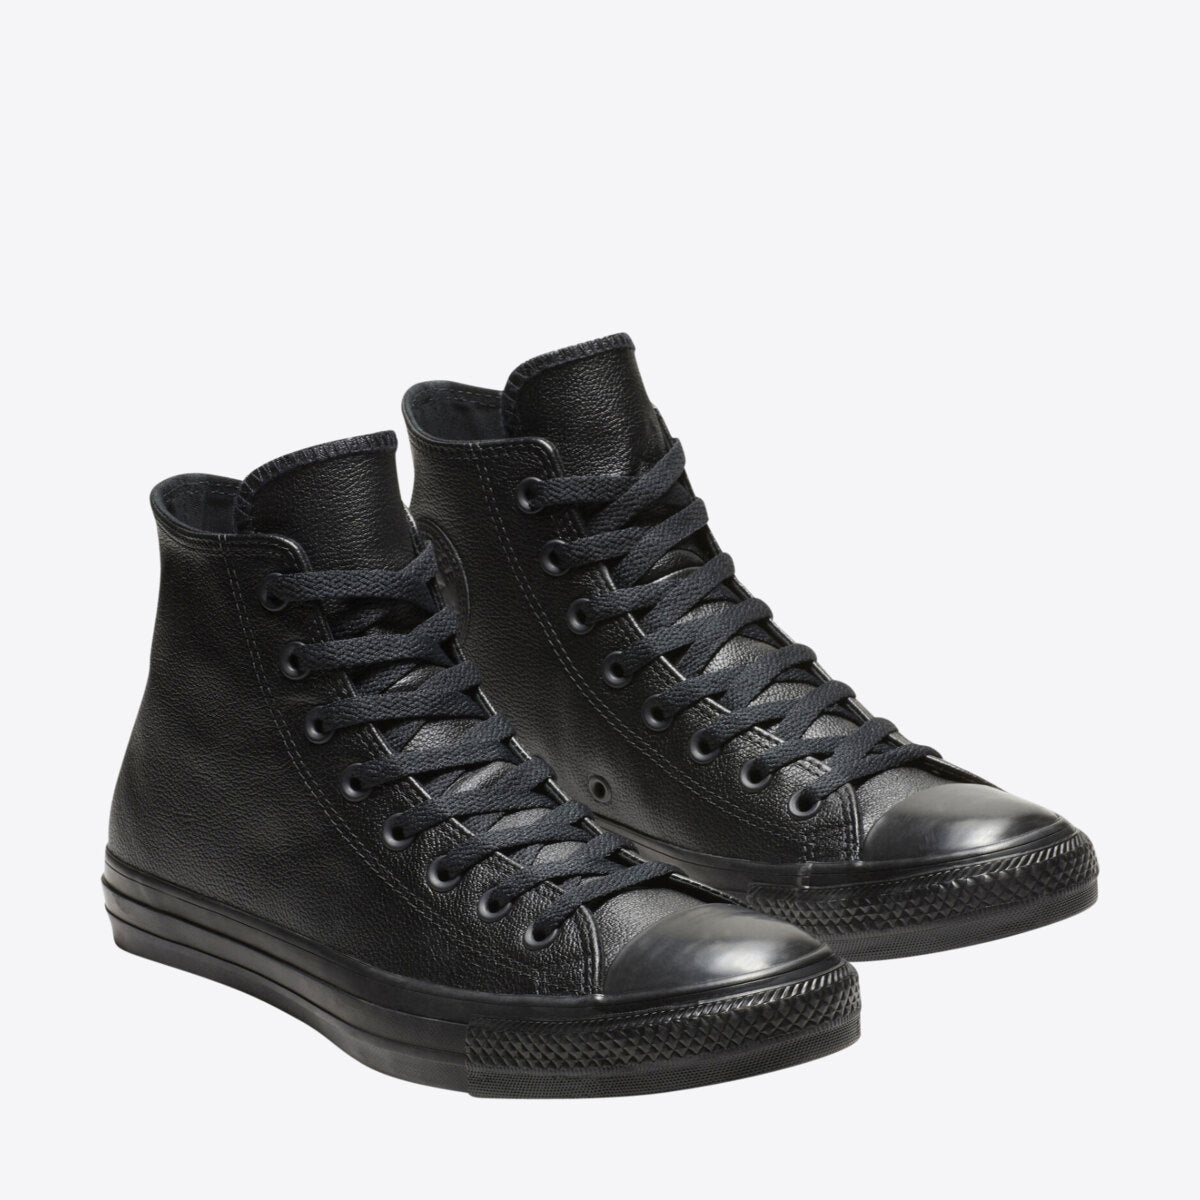  Chuck Taylor All Star Leather High Top Black Mono